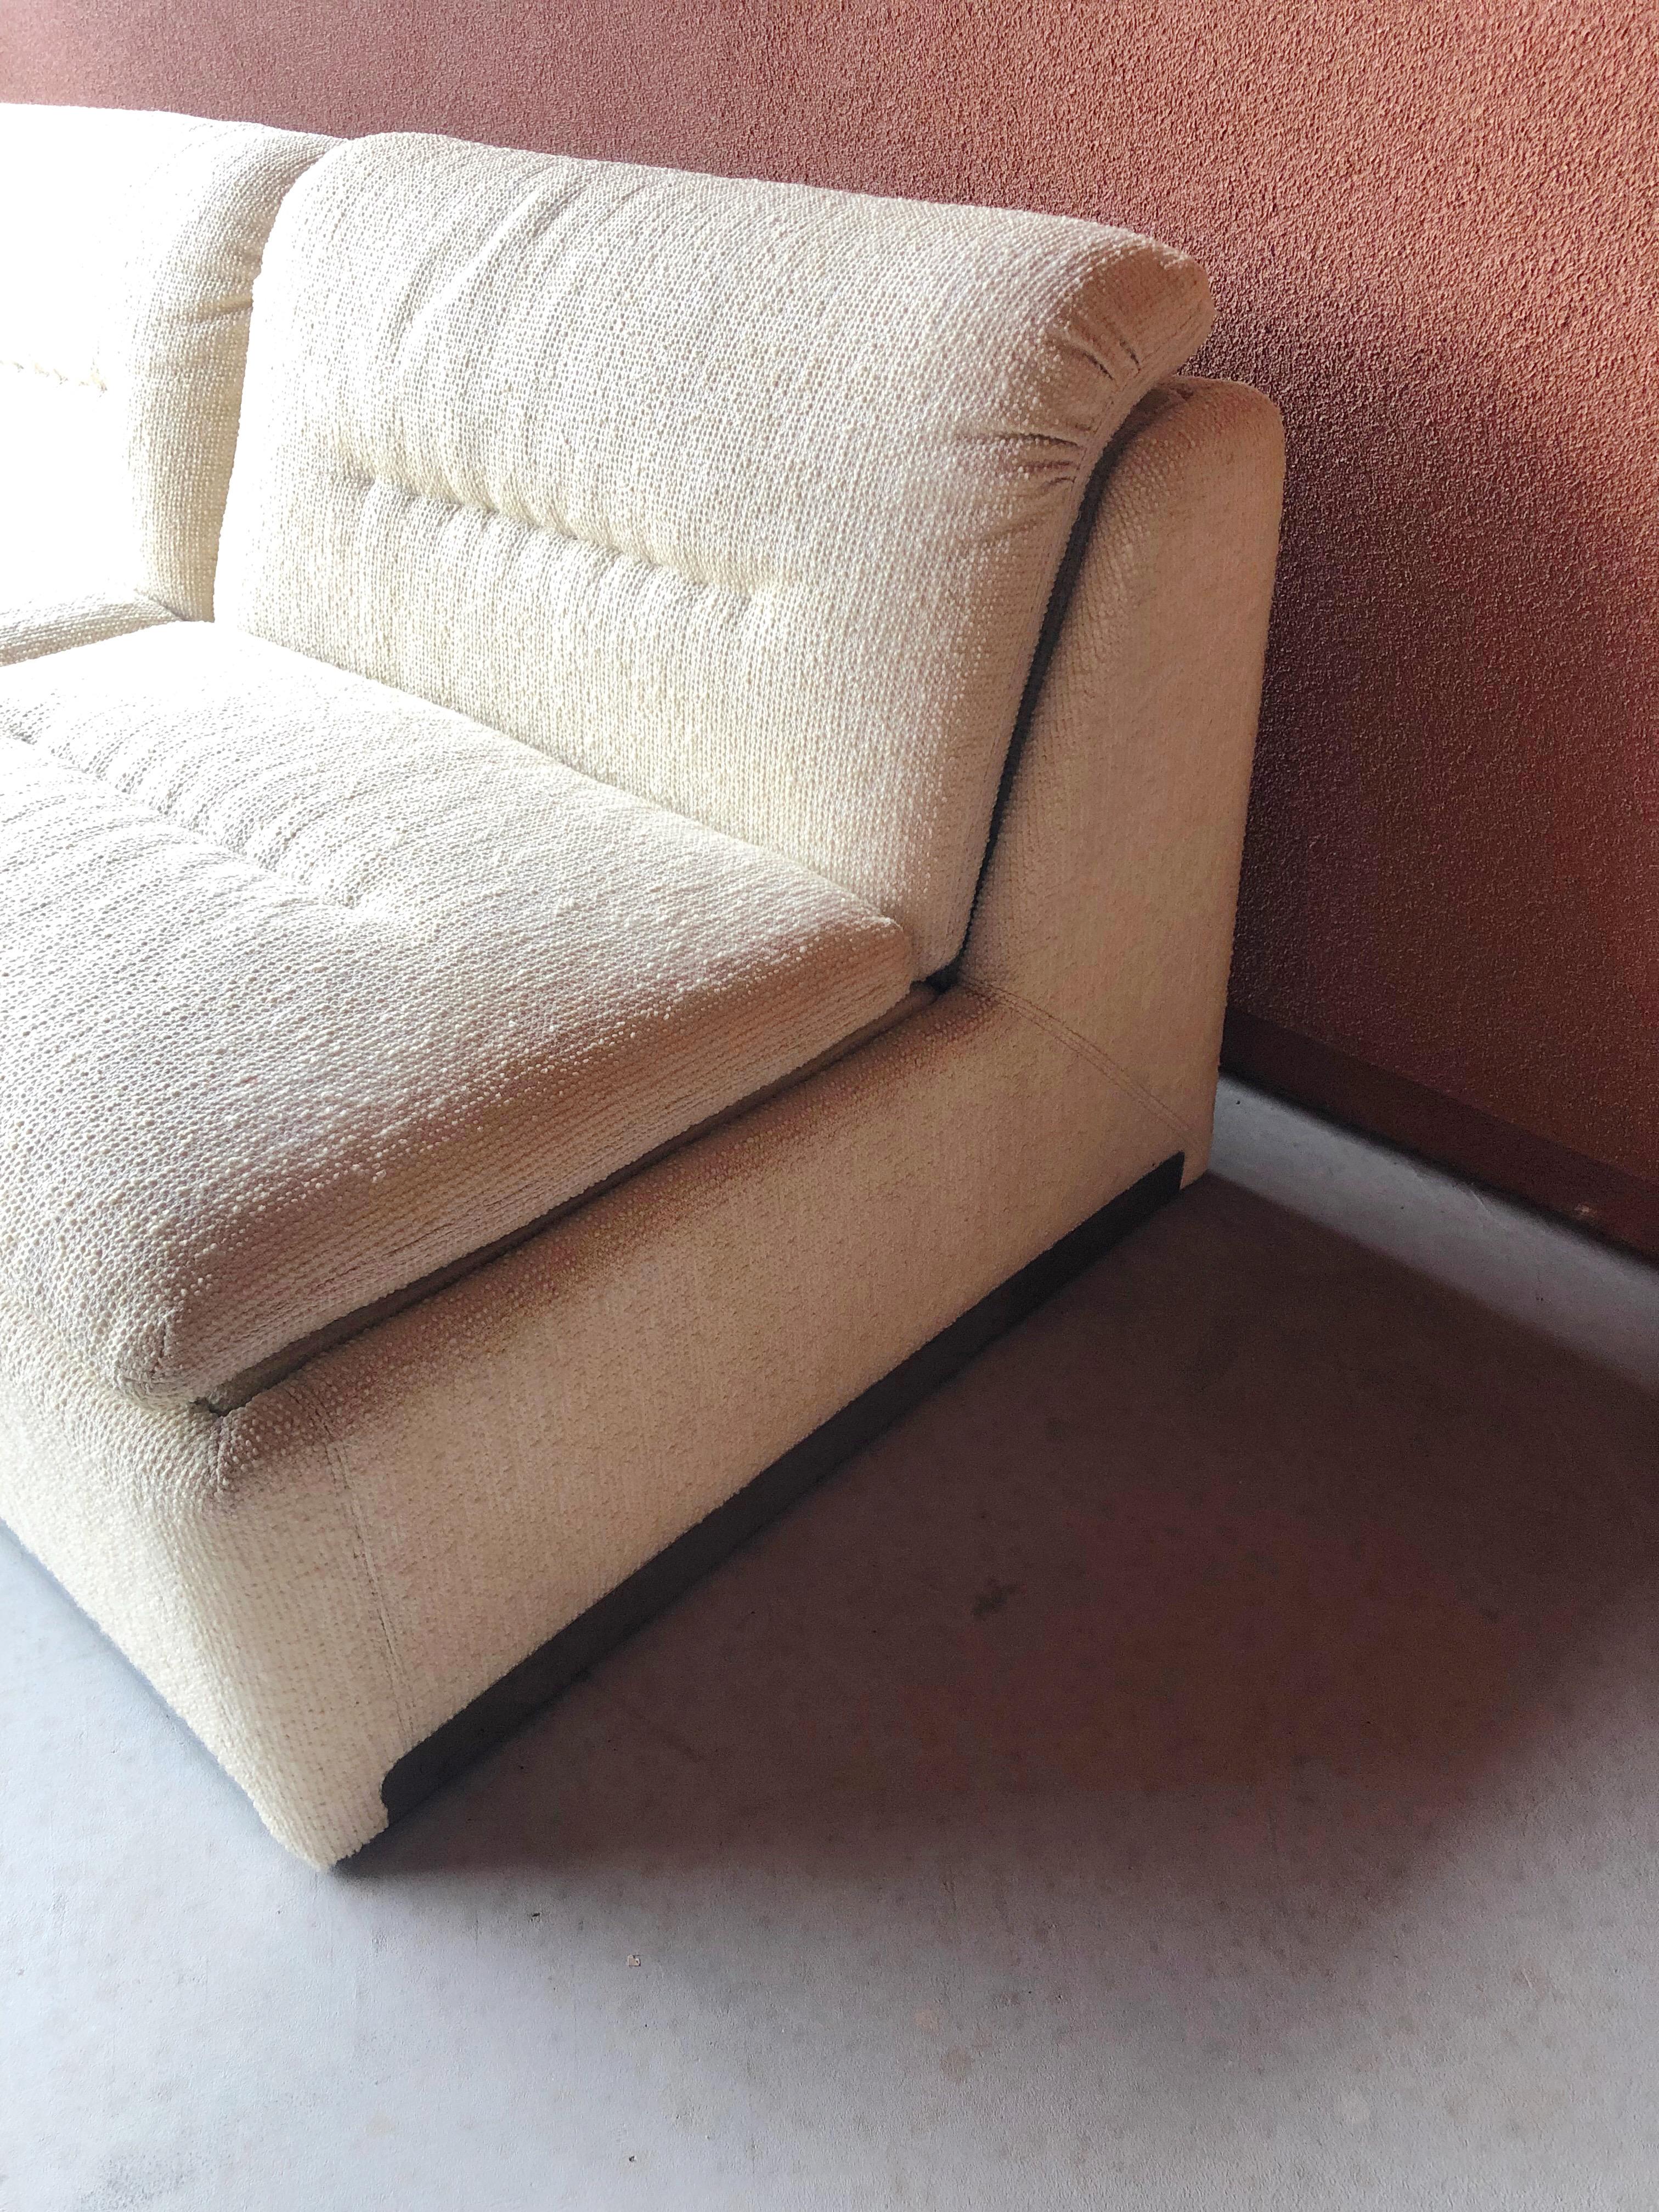 Other Saporiti Proposals Modular Armchair/Loveseat Sofa in Ivory Boucle, c. 1970s